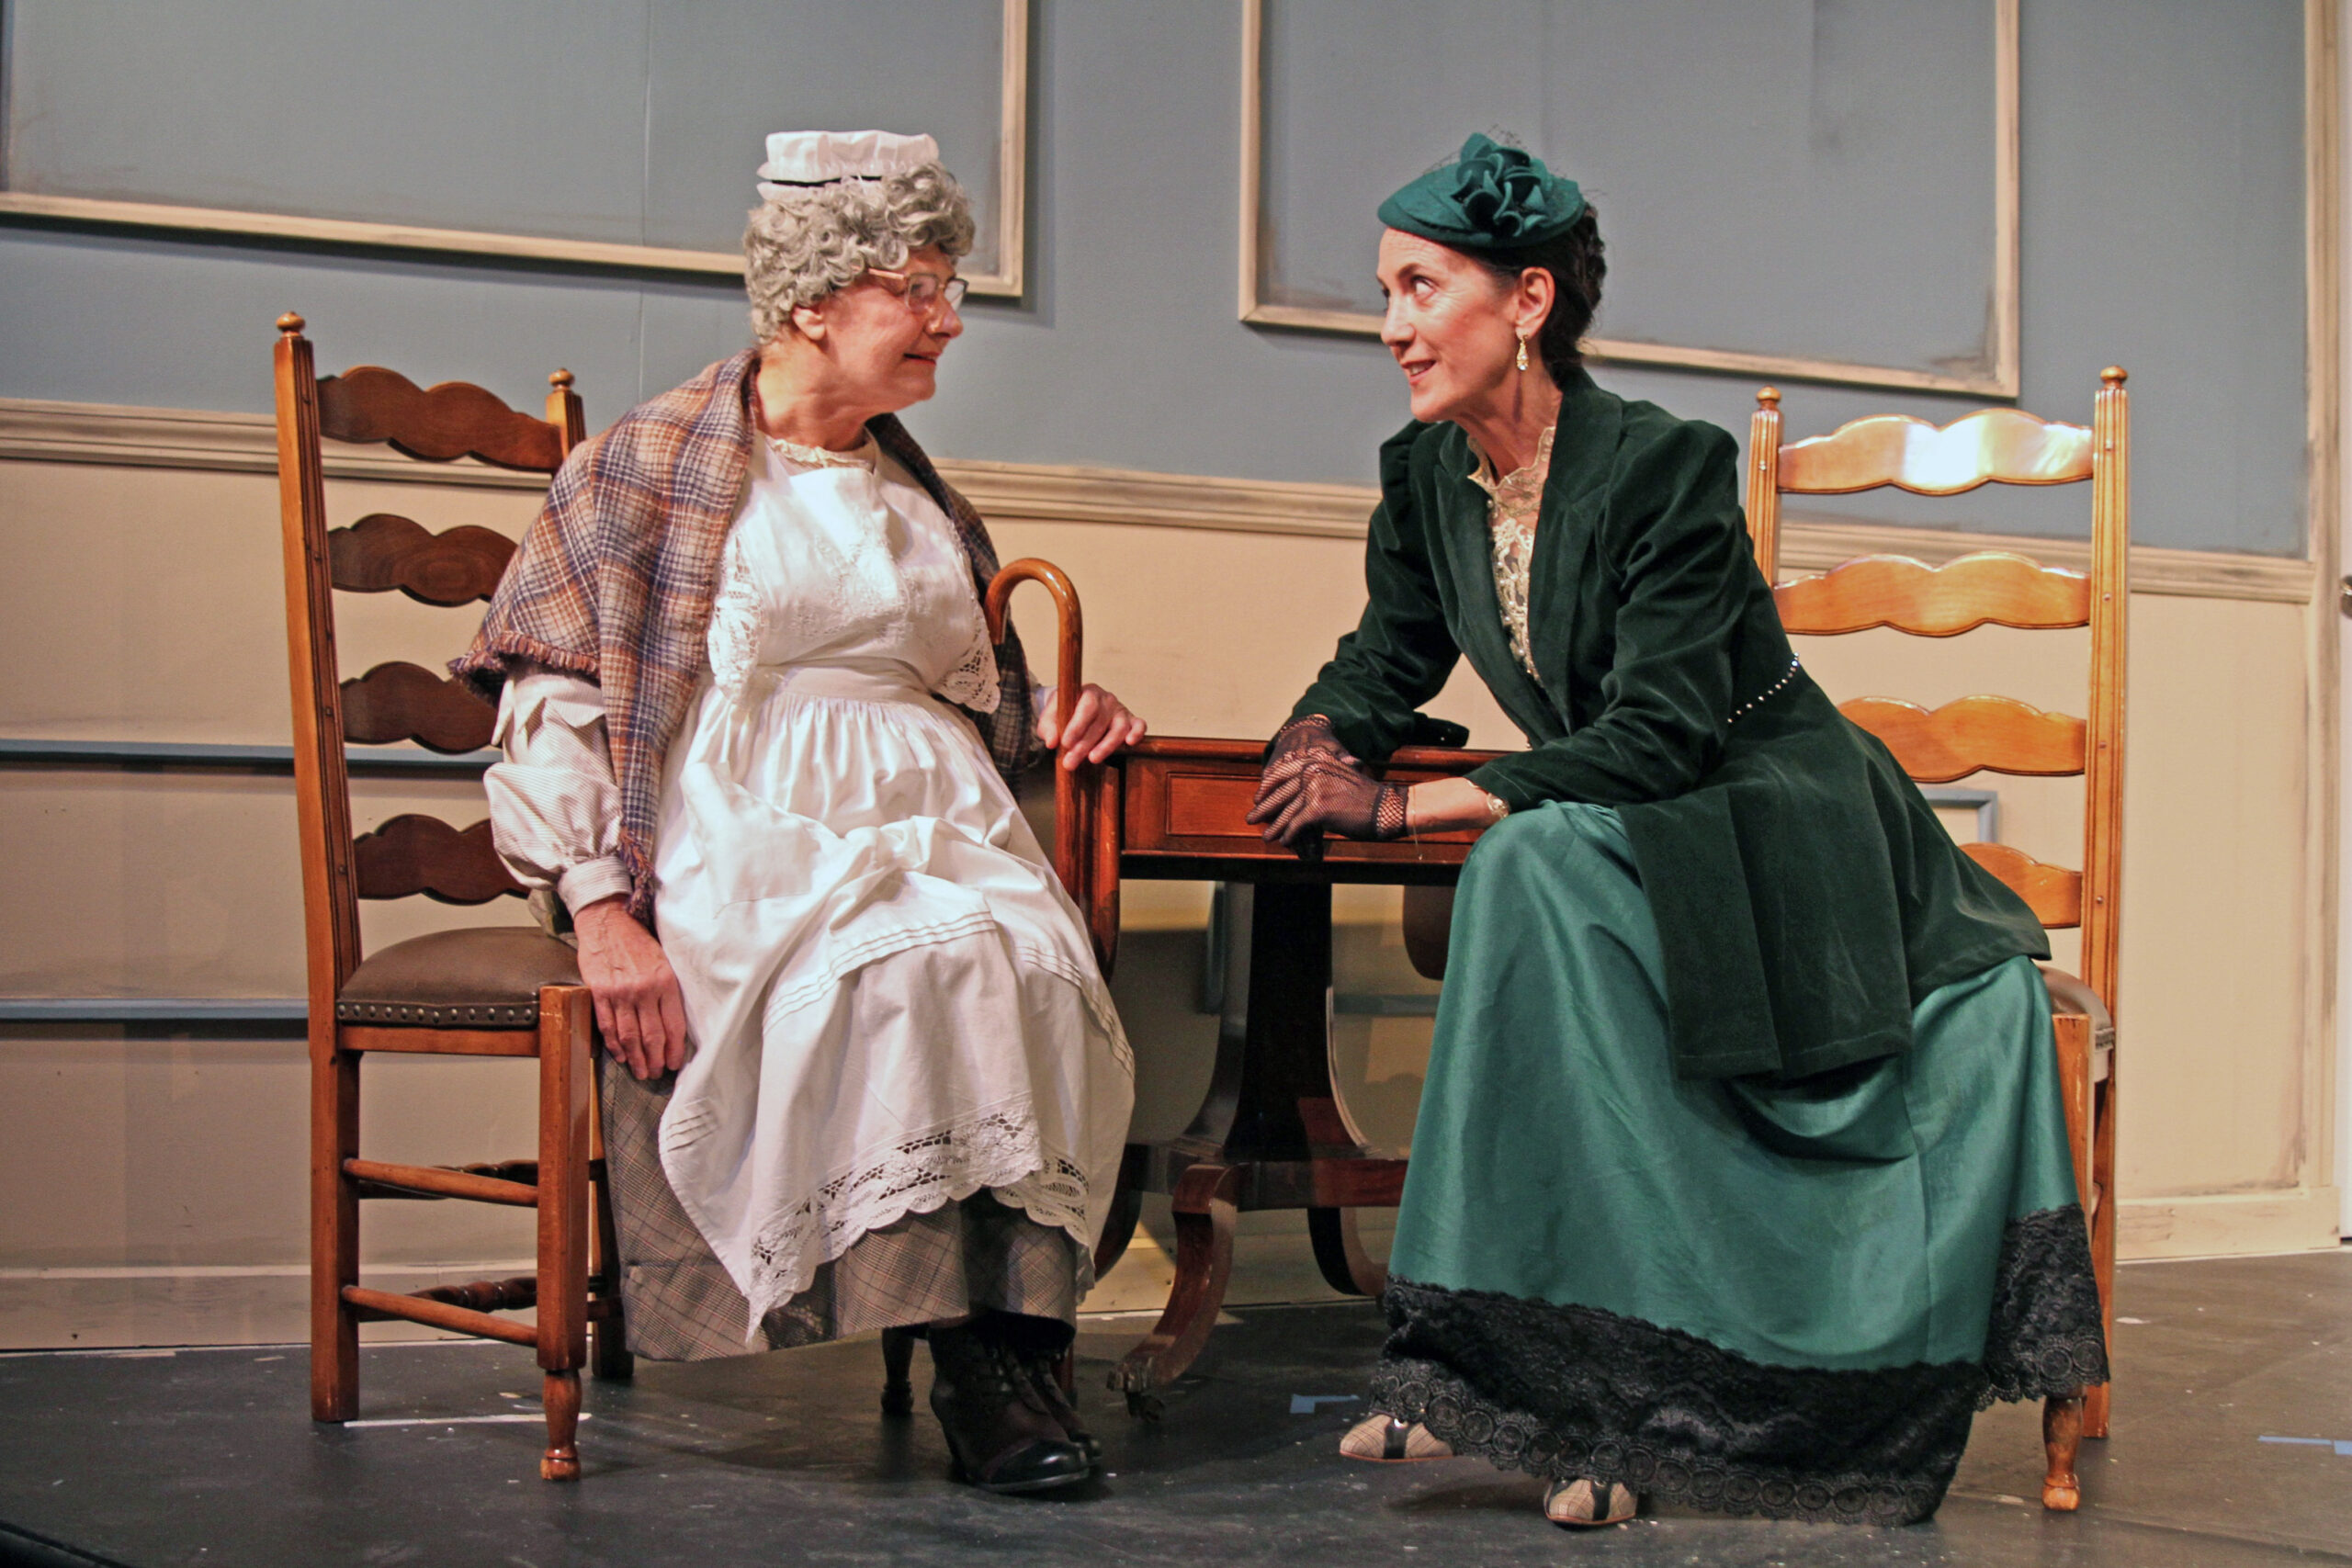 Marianne Schmidt and Rosemary Cline in rehearsal for “A Doll’s House, Part 2” presented by Hampton Theatre Company running May 26 to June 12. TOM KOCHIE